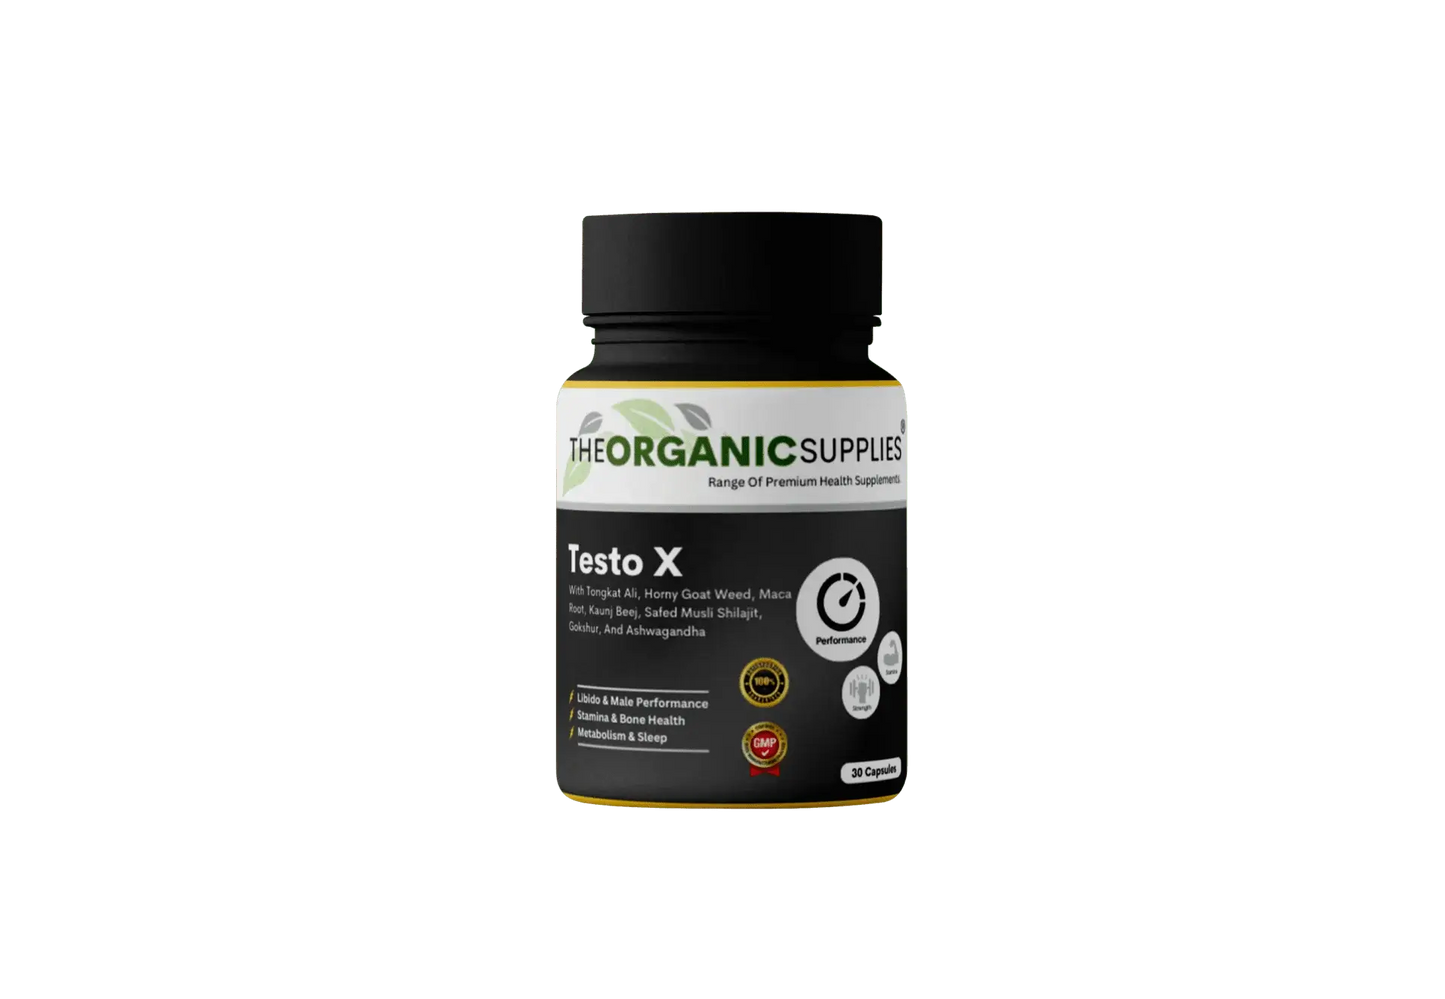 A photorealistic image of a bottle of TheOrganicSupplies testo X supplements.  